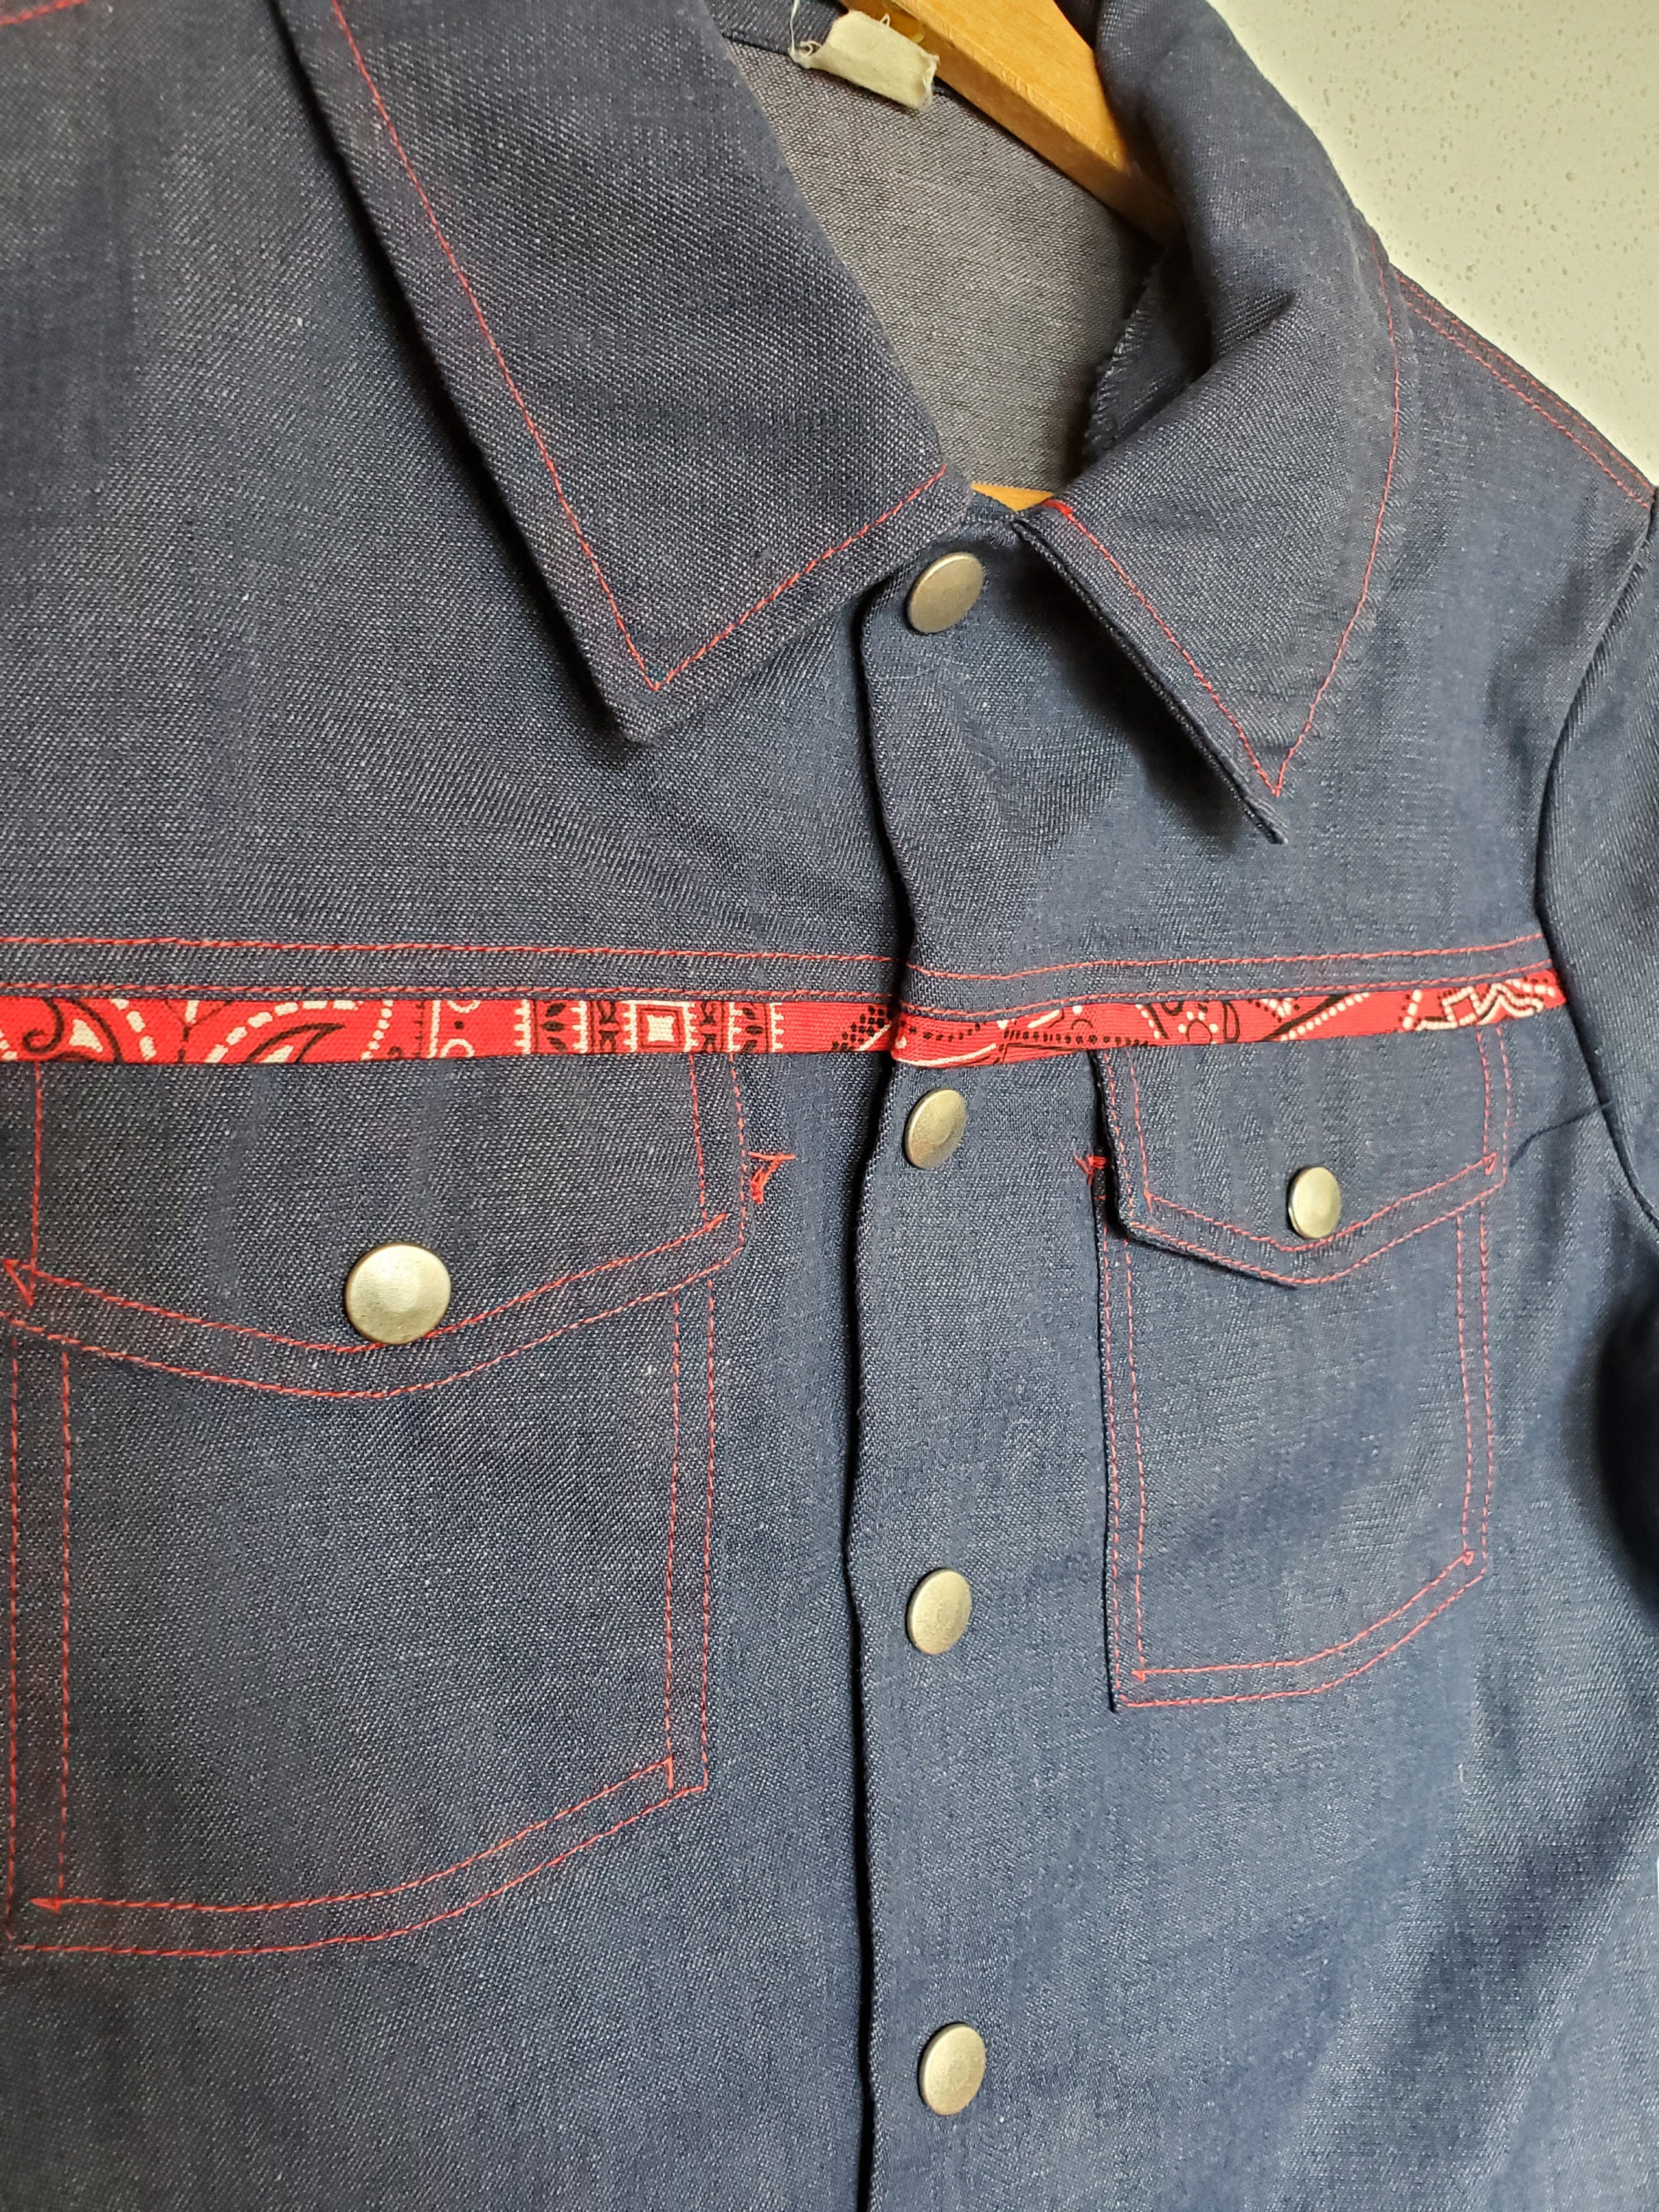 Vintage 1950s 1960s Blue Denim Long Sleeve Shirt with Red | Etsy